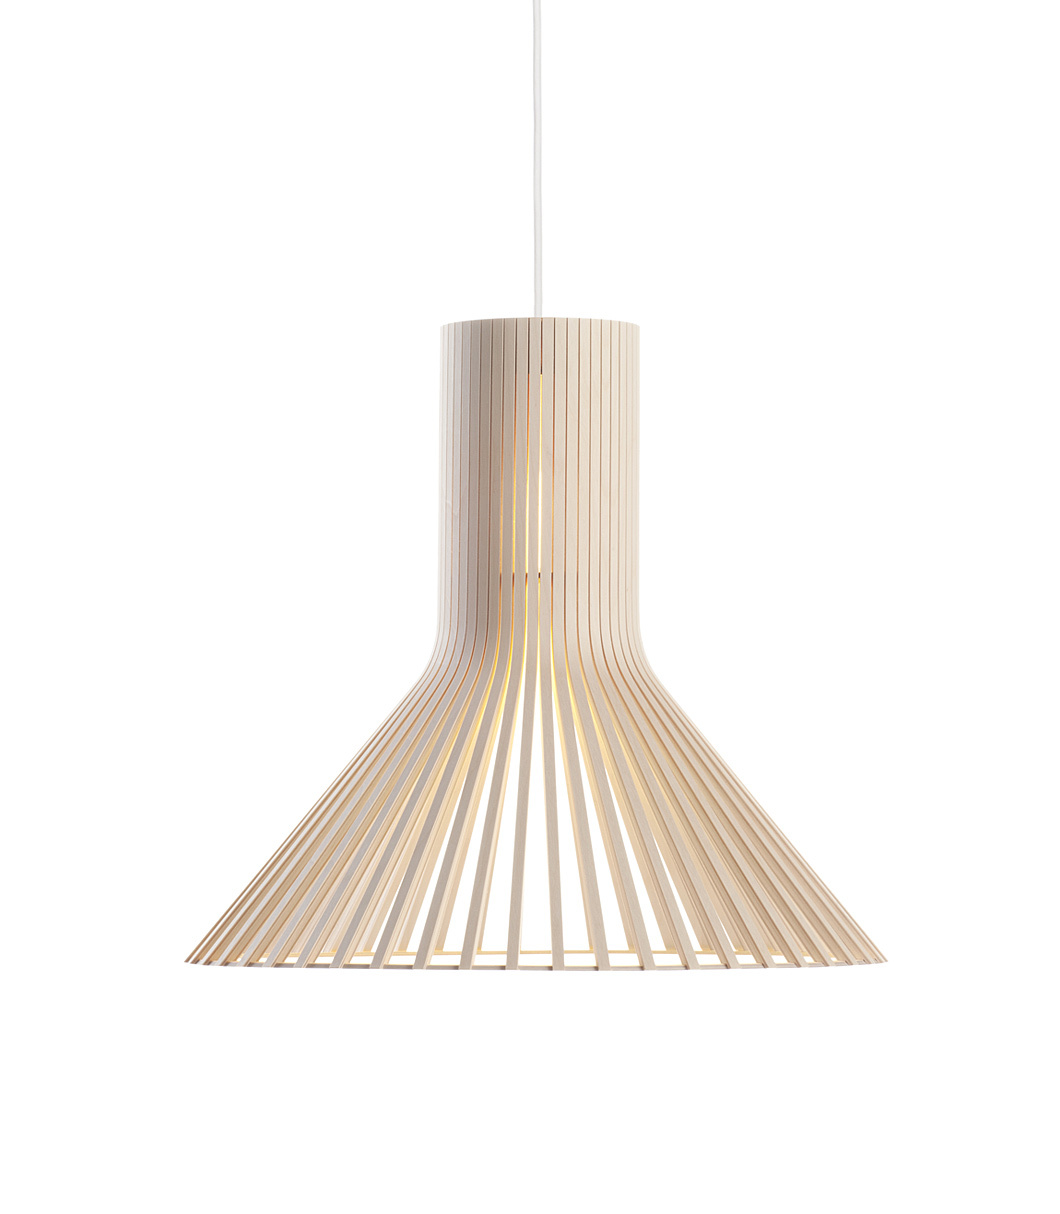 Puncto 4203 pendant lamp is available in natural birch